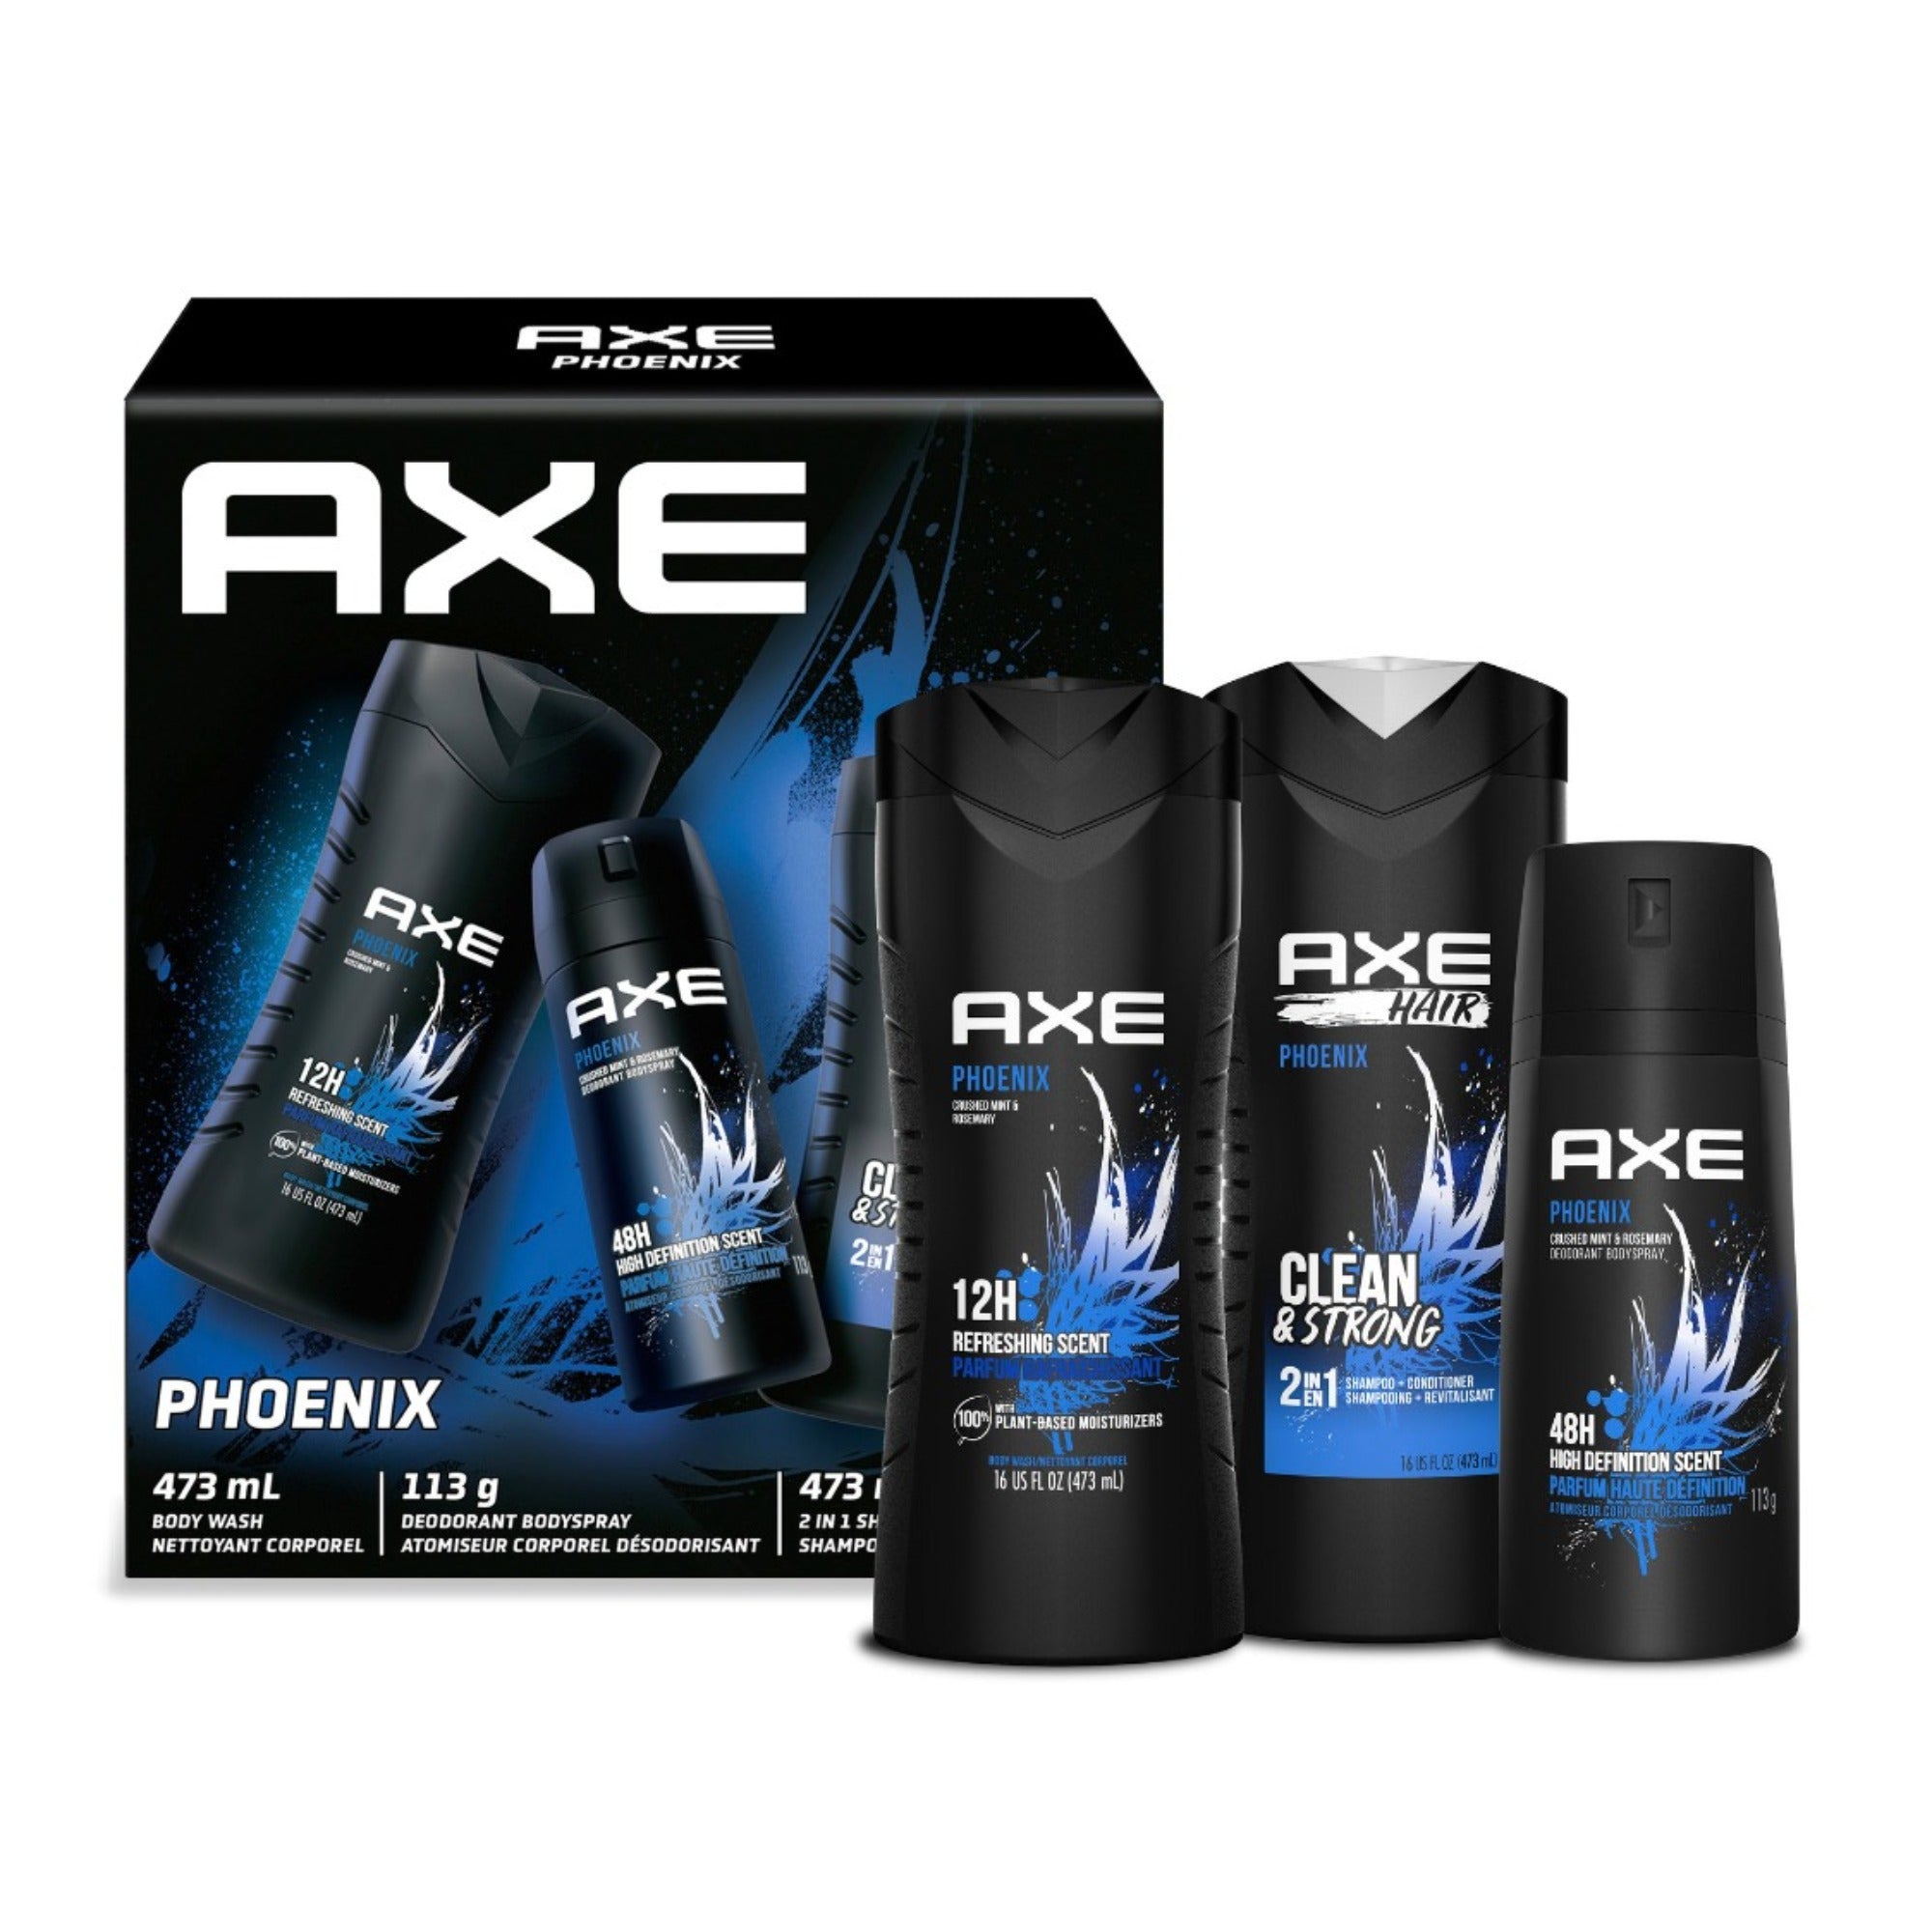 Showing the front angle view of the AXE Phoenix Gift Set for Men giftpack box, with the 3 included products outside of the box